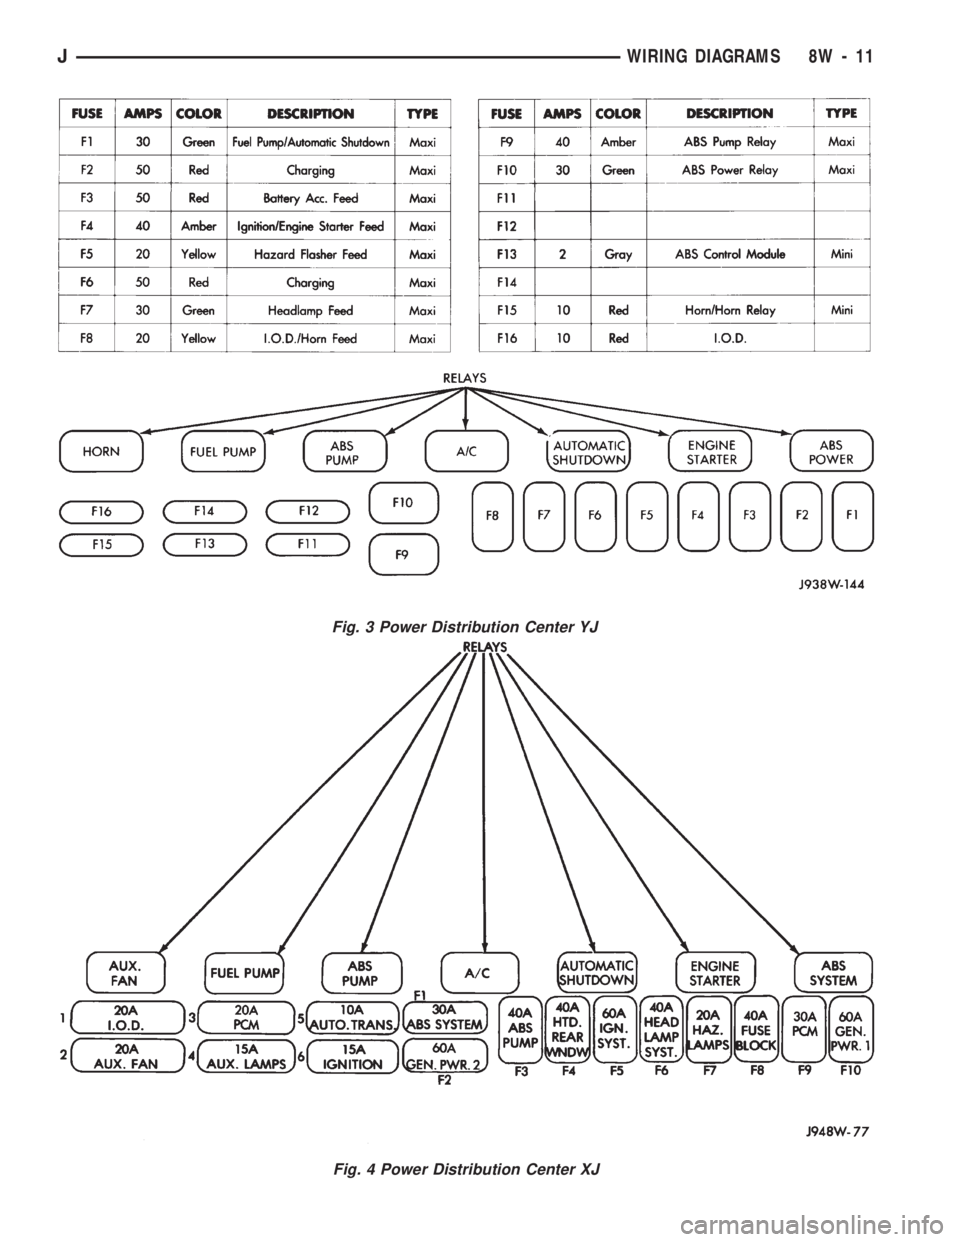 JEEP WRANGLER 1994  Owners Manual Fig. 4 Power Distribution Center XJ
JWIRING DIAGRAMS 8W - 11 